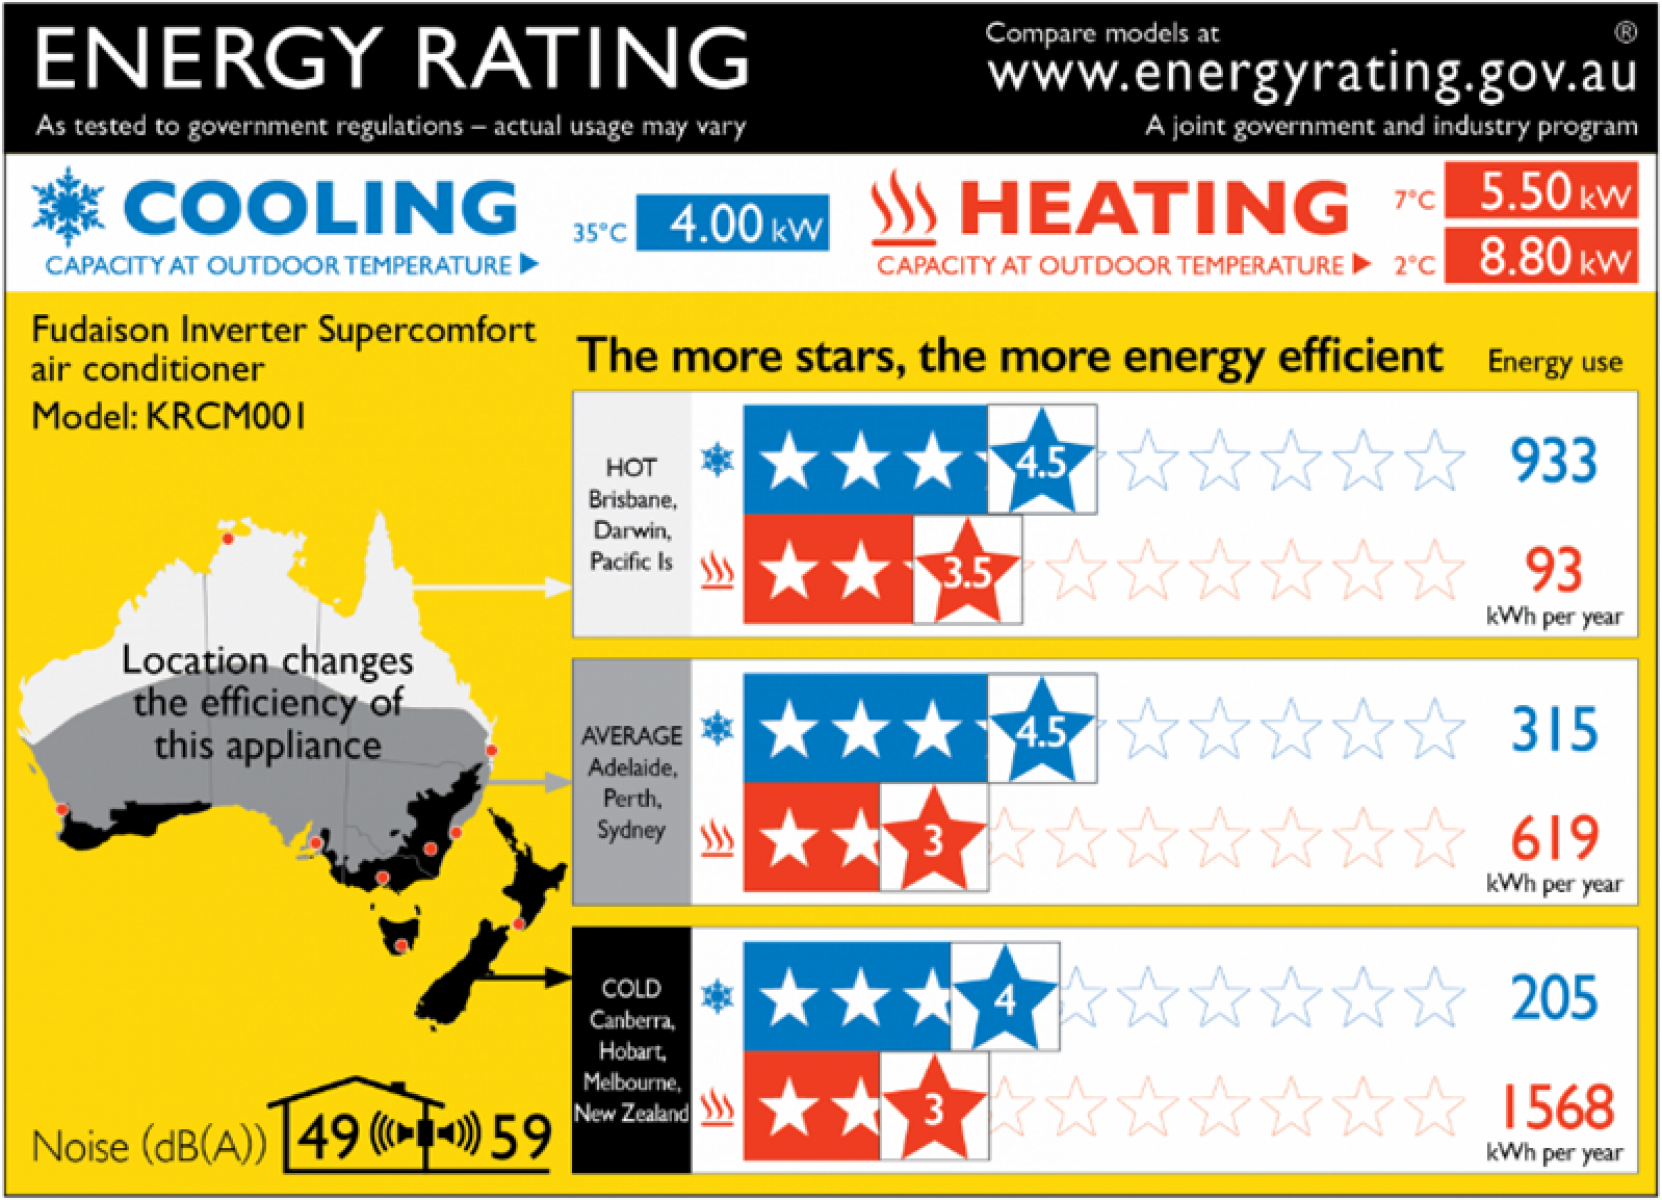 An example of an energy rating label showing information about the energy rating of a cooling system.